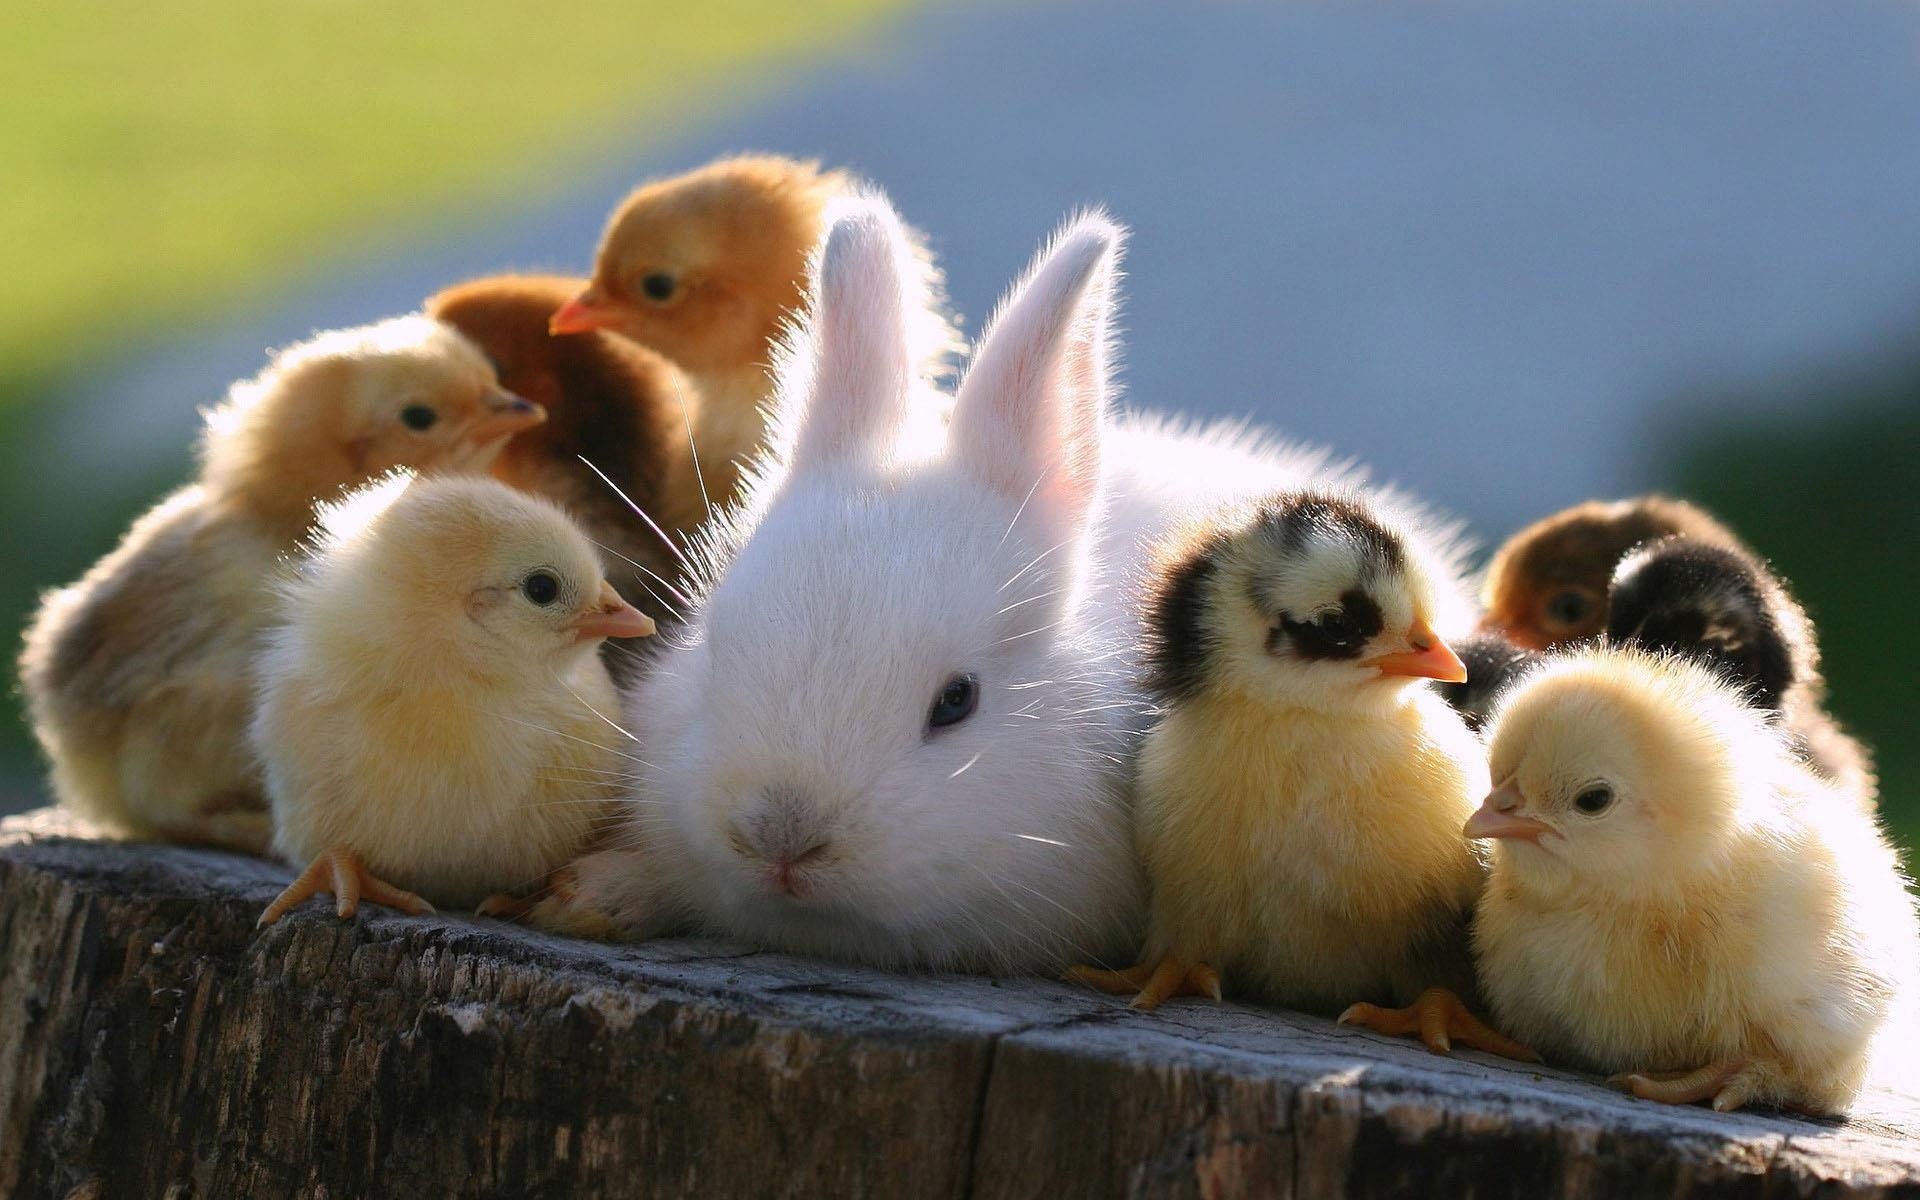 Cute Bunny With Little Chicks Wallpaper | 1920x1200 | ID:32480 ...